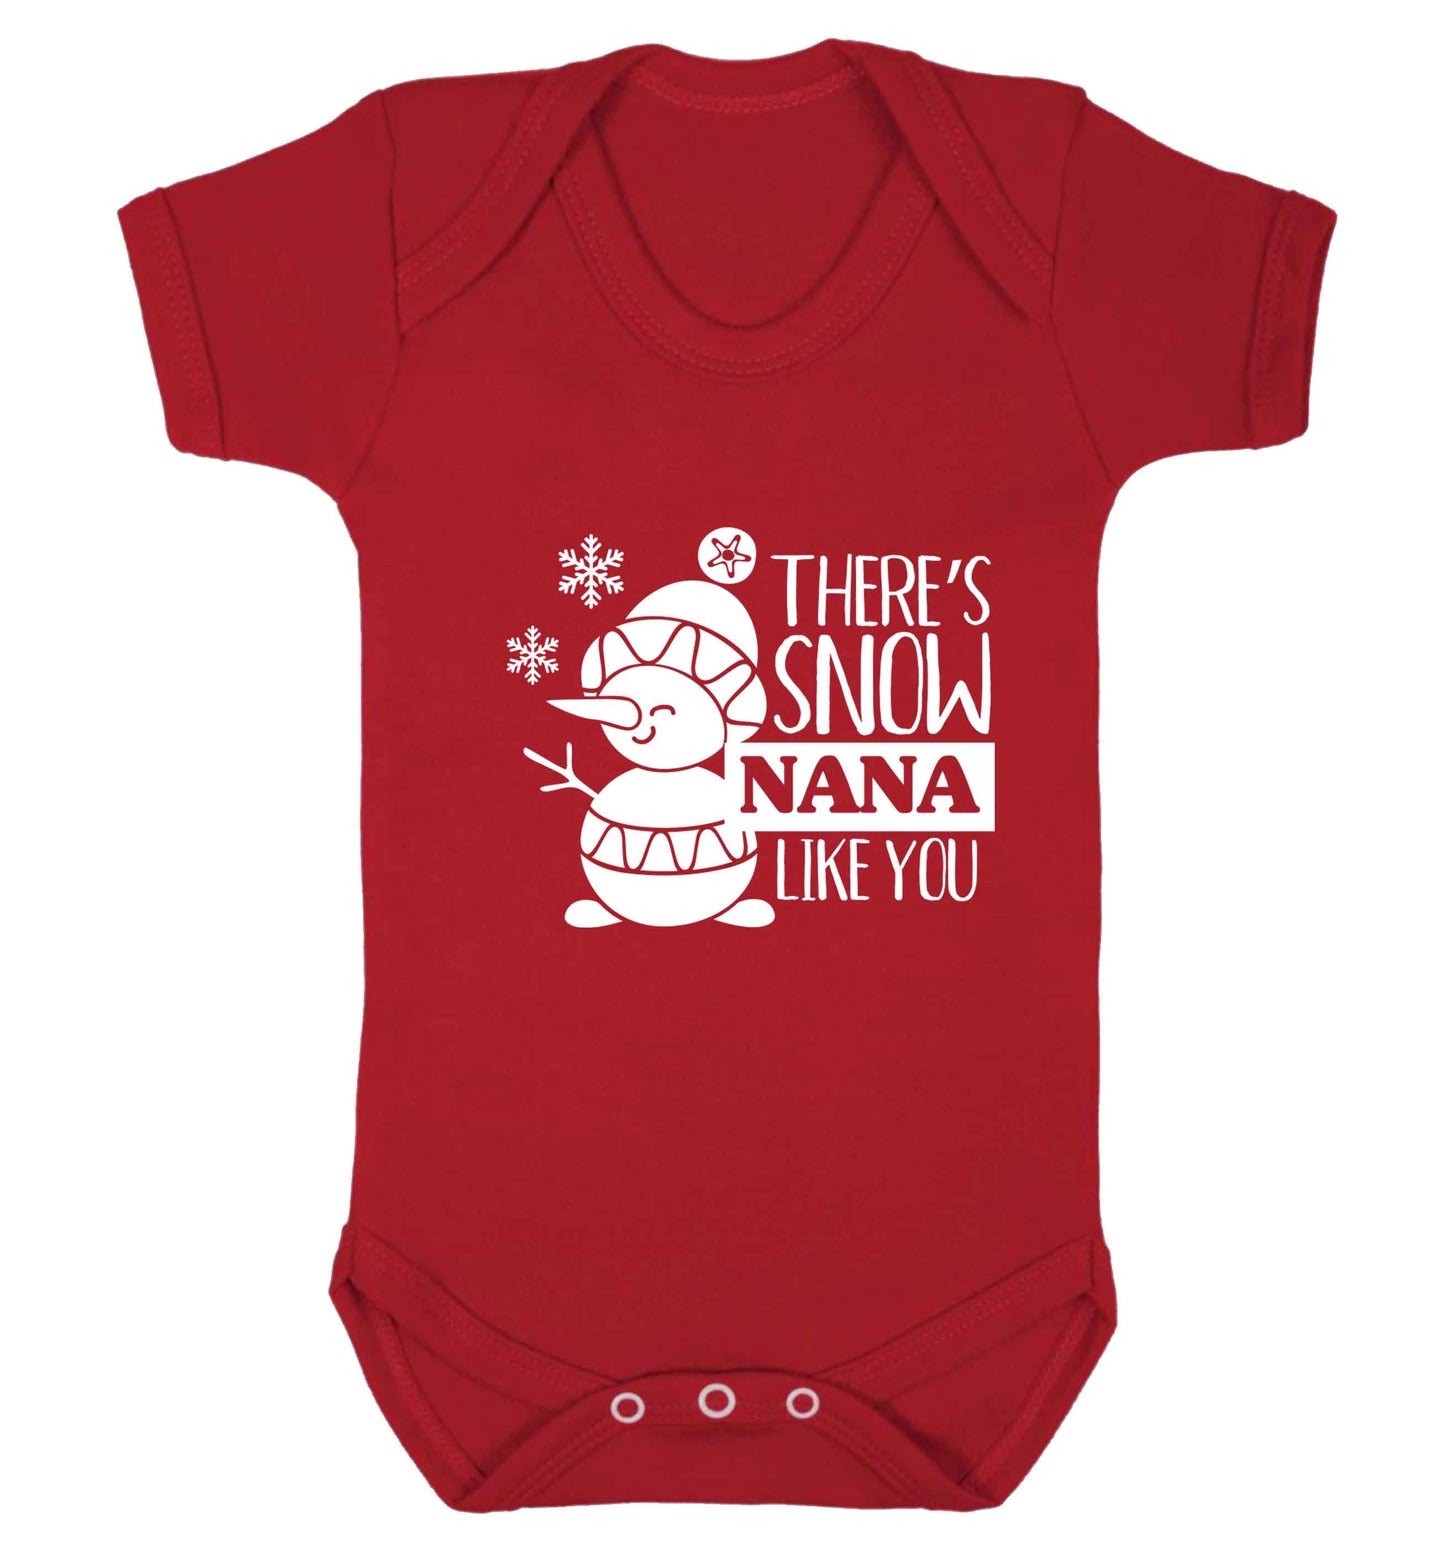 There's snow nana like you baby vest red 18-24 months